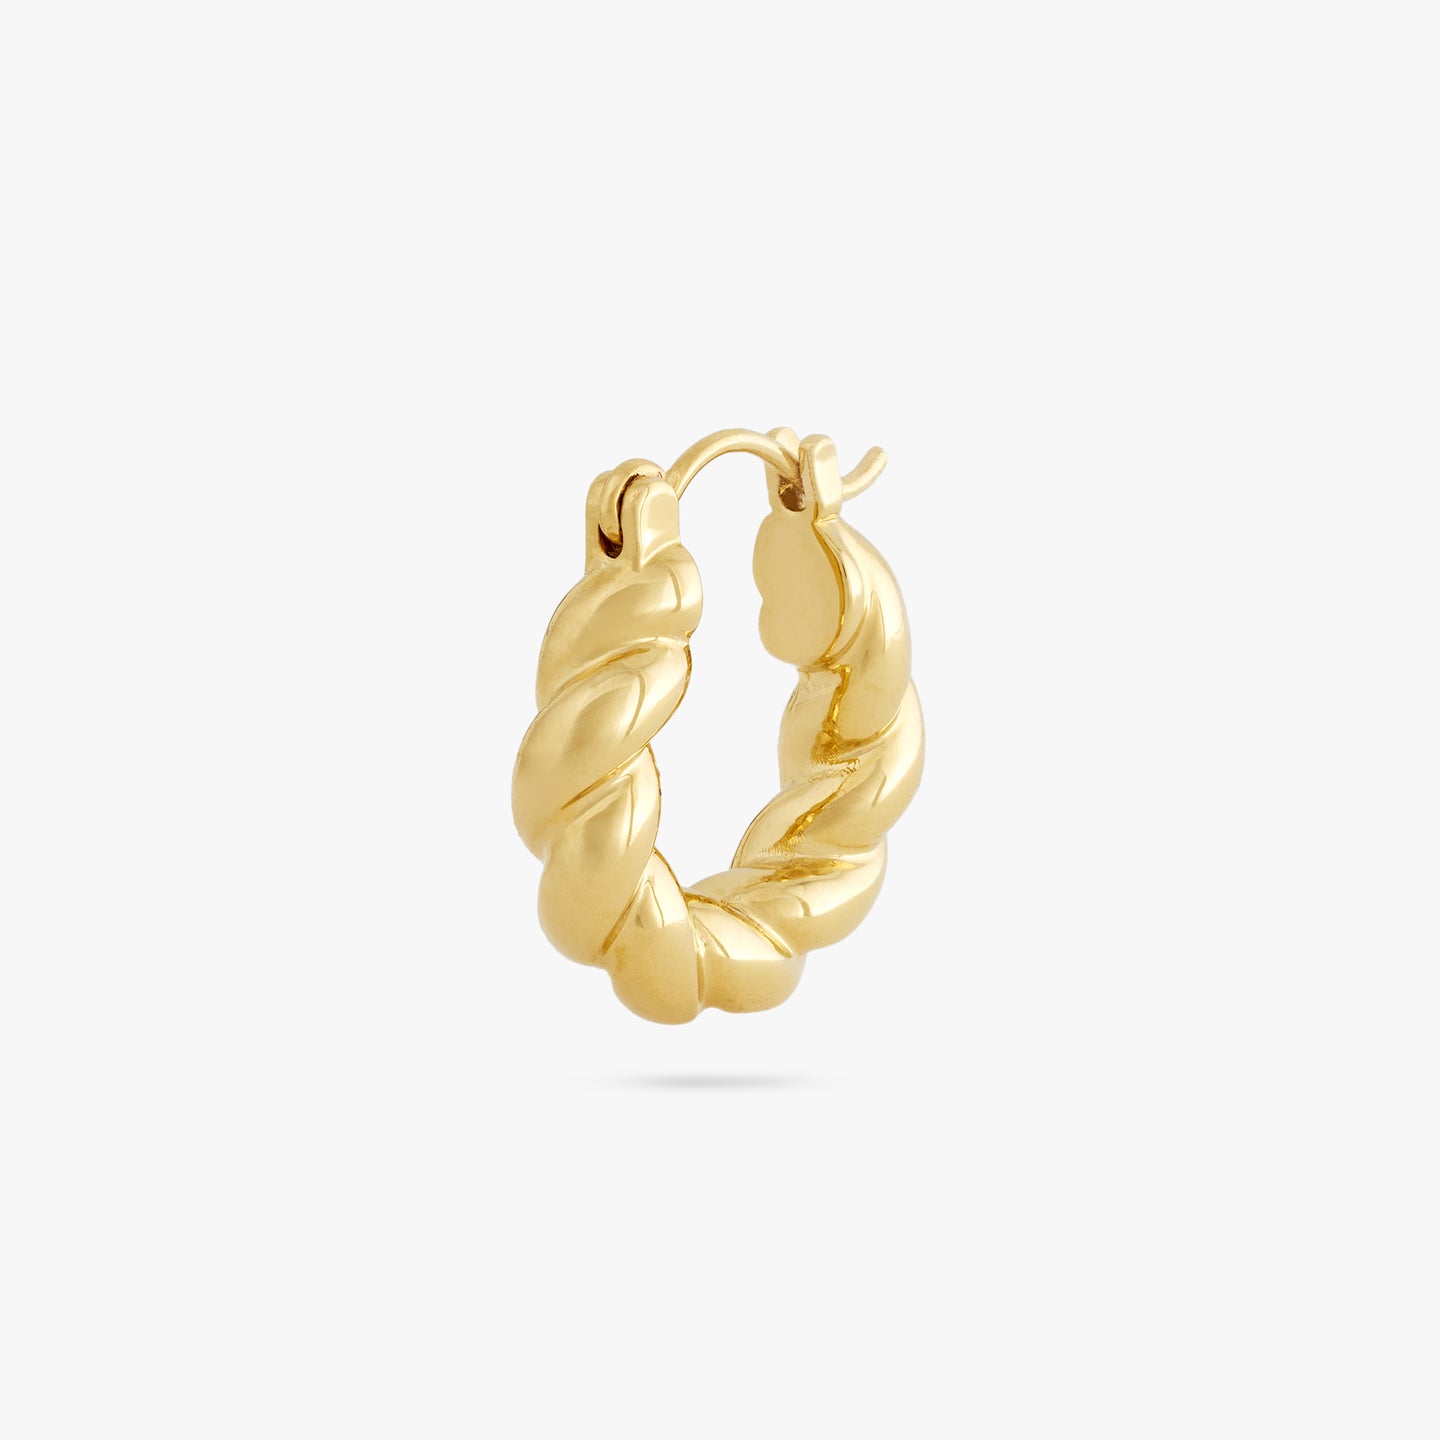 This is a small gold hoop with a twisted detail that clasps shut color:null|gold